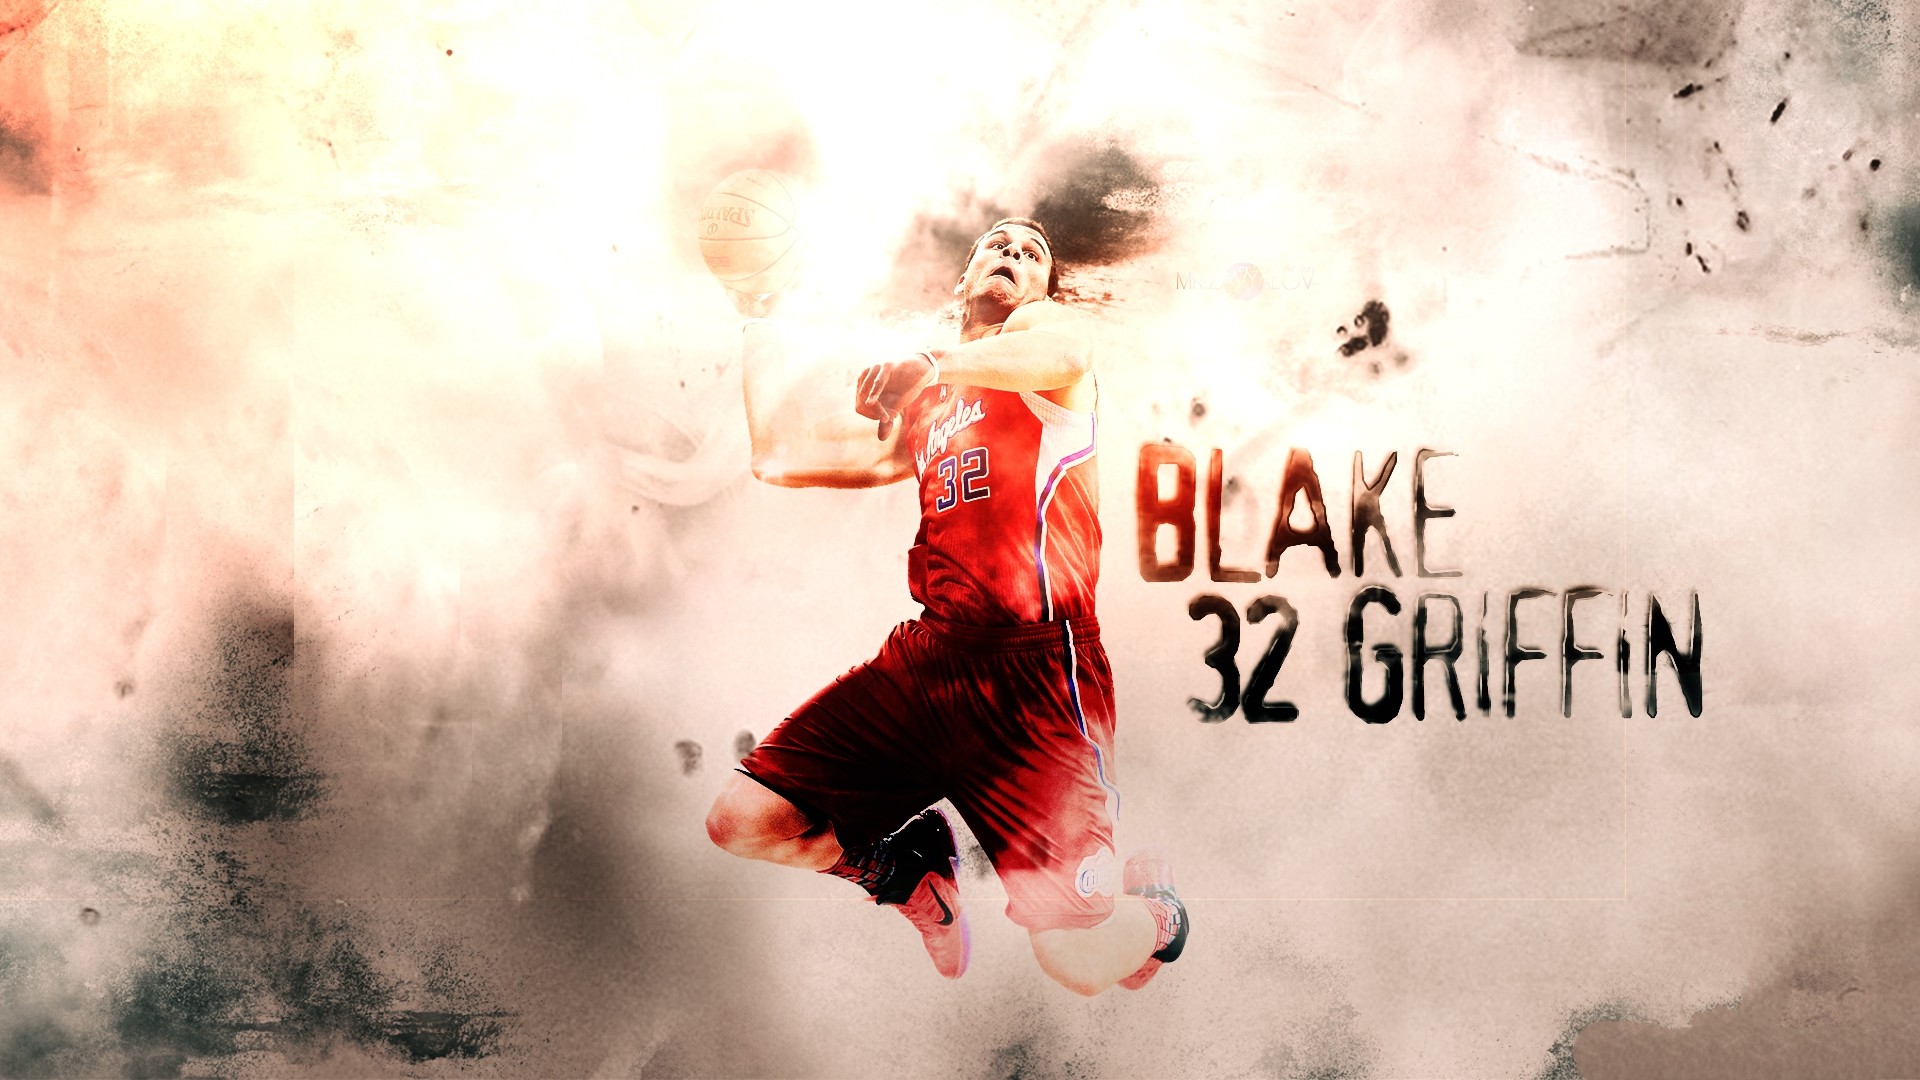 1920x1080 Blake-Griffin-Losangeles-Clippers-Images